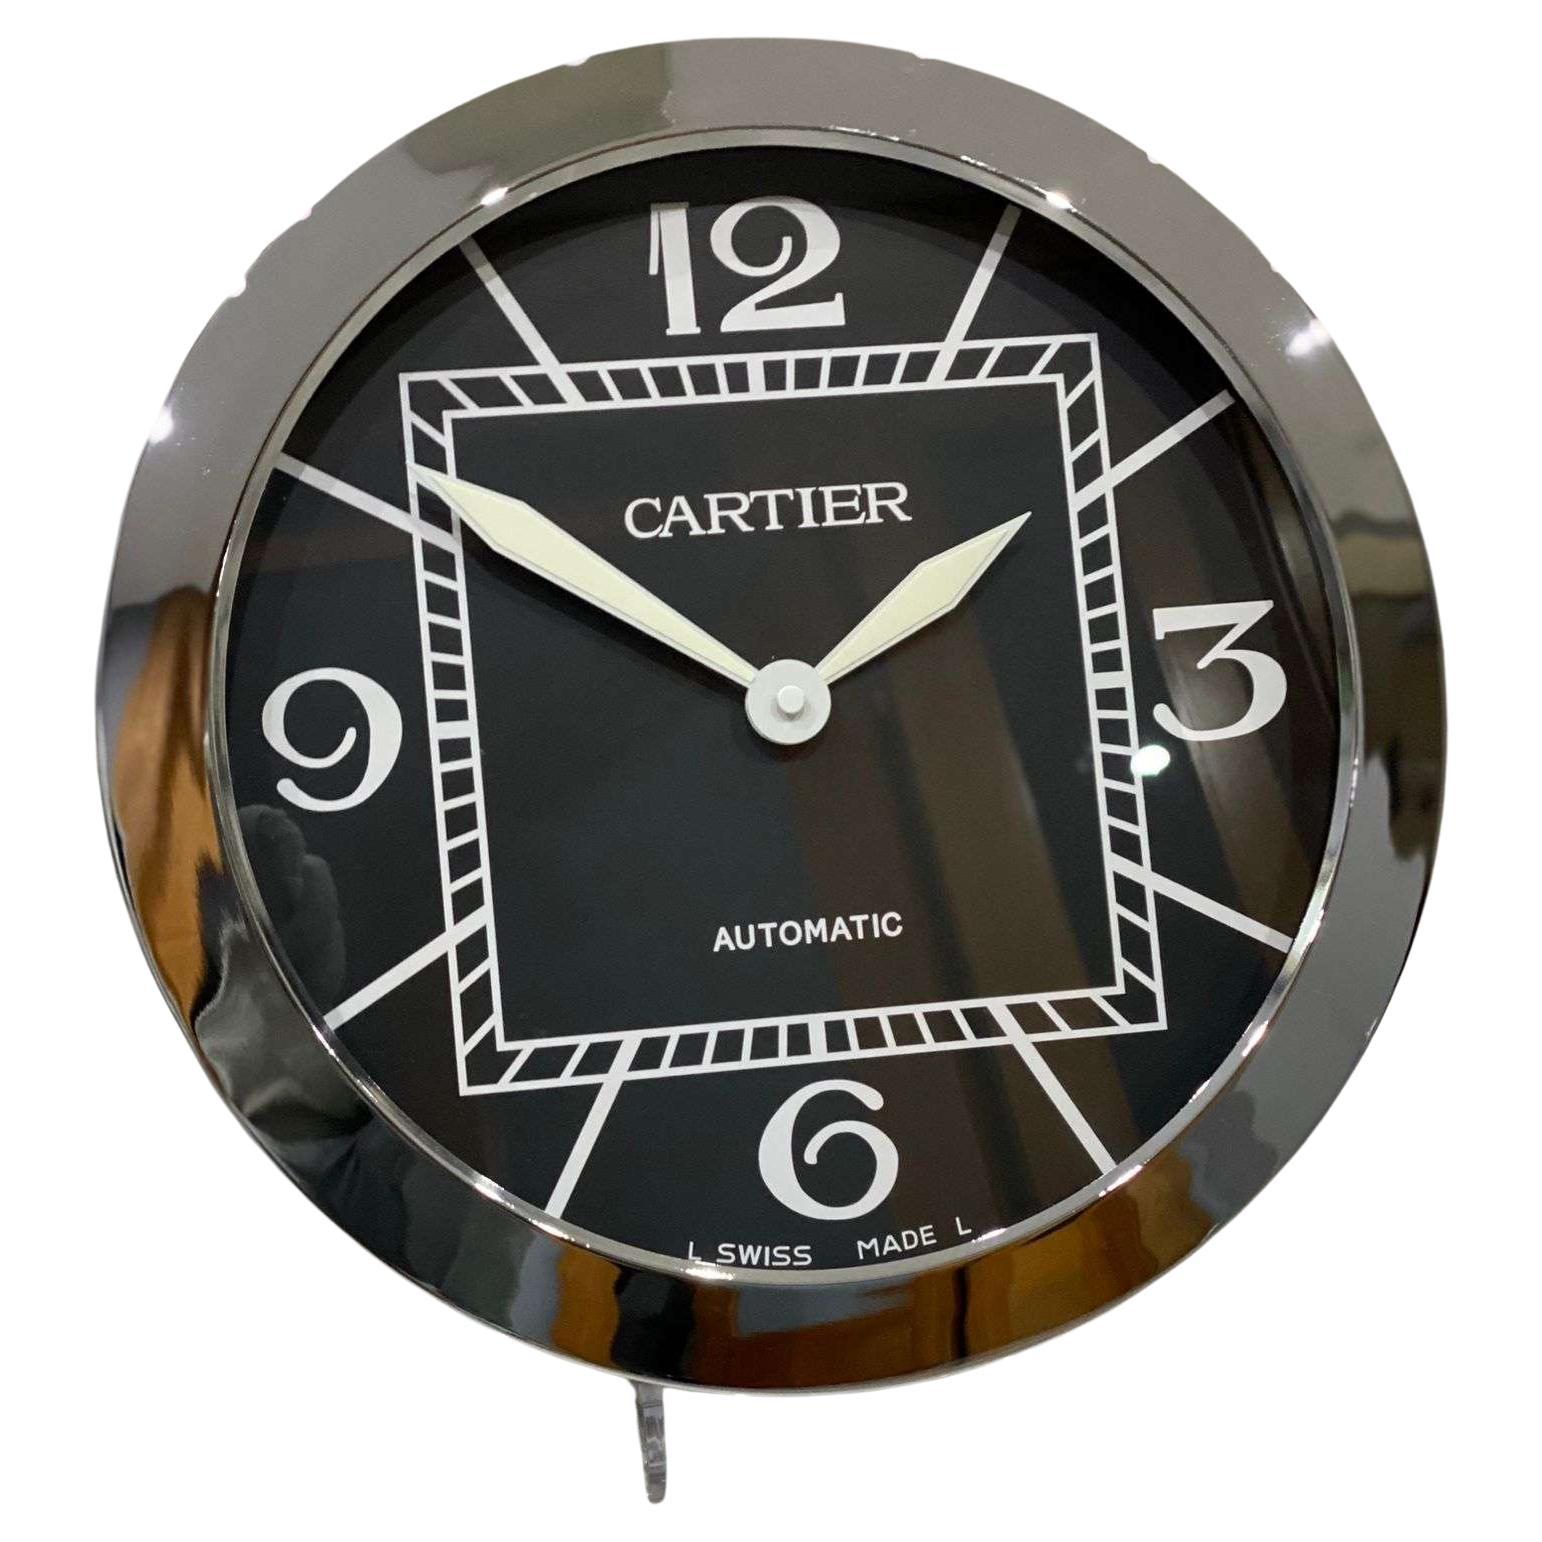 Cartier Officially Certified Silver Chrome & Black Wall Clock 